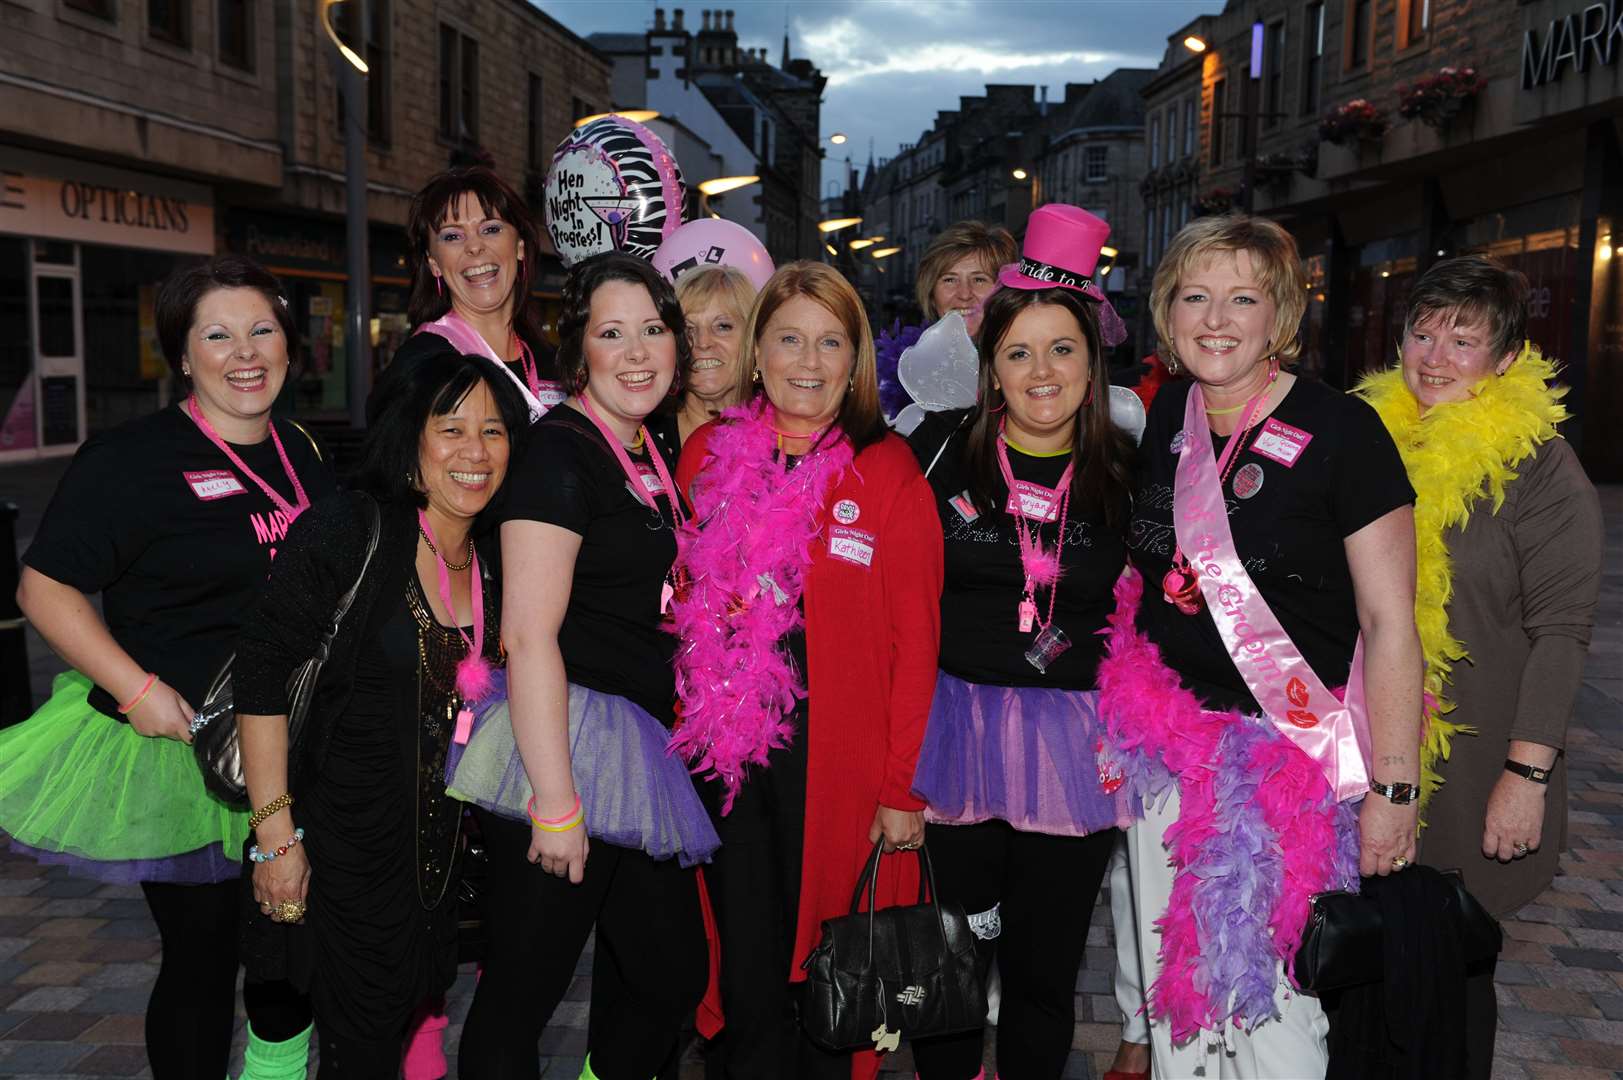 Hen night with family and friends with meal at Little Italy for Mary Anne Lynch (centre, hat) before forthcoming wedding to Raymond MacDonald.